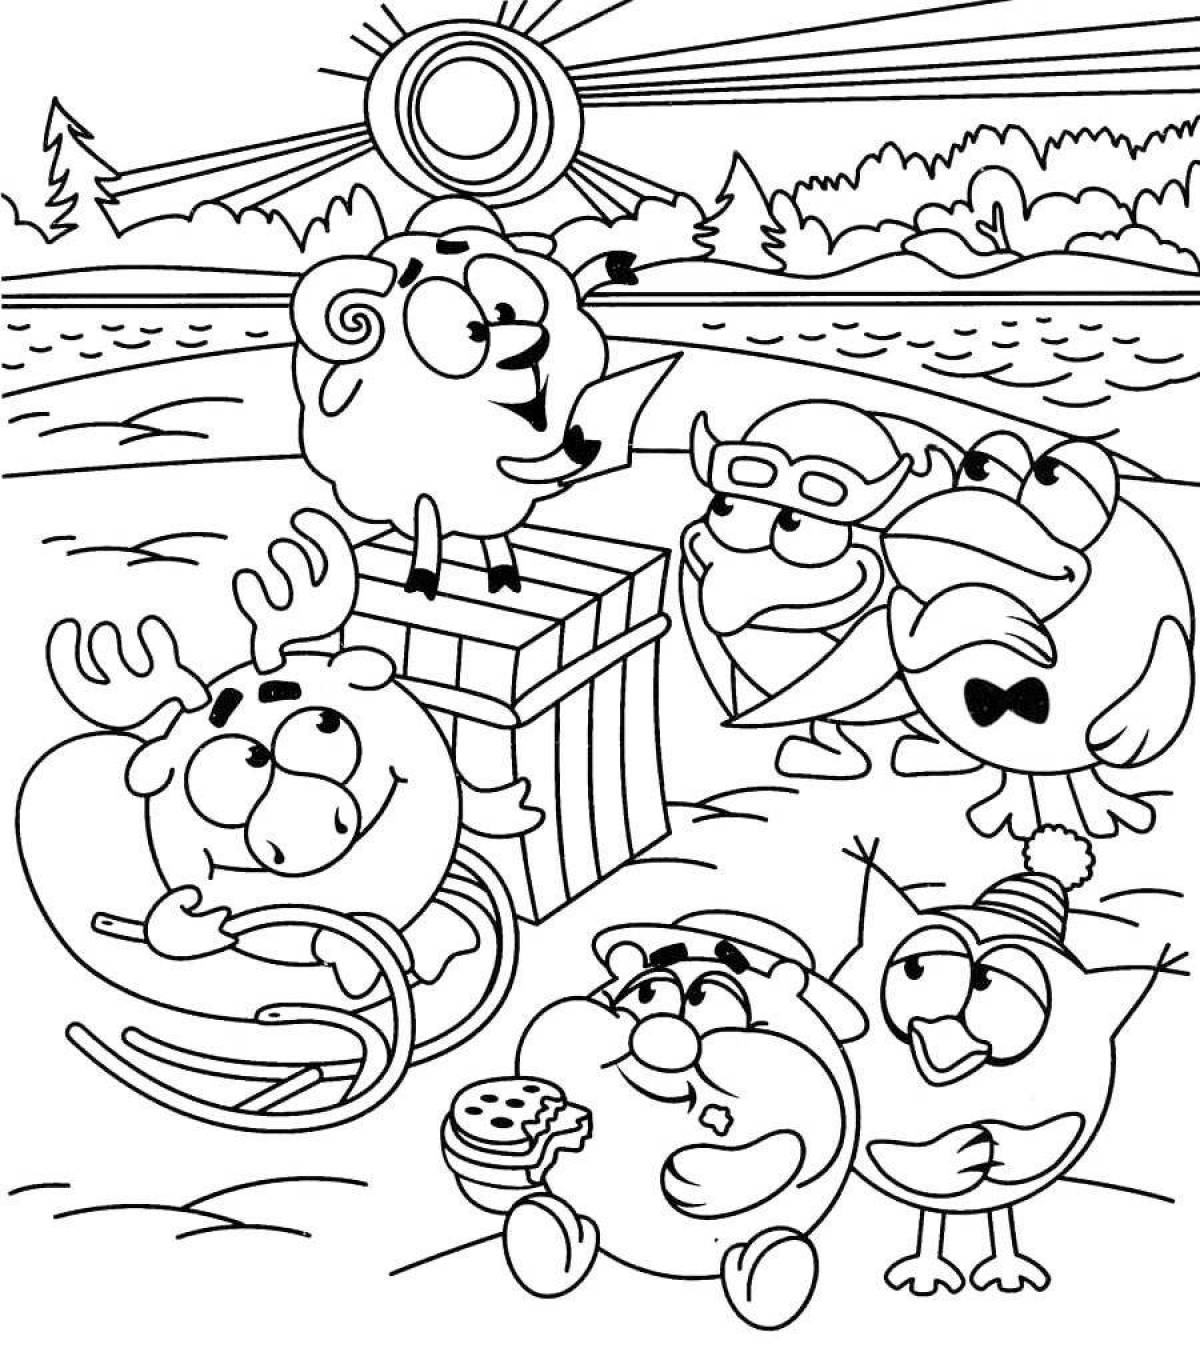 Color-frenzy all smeshariki together coloring book